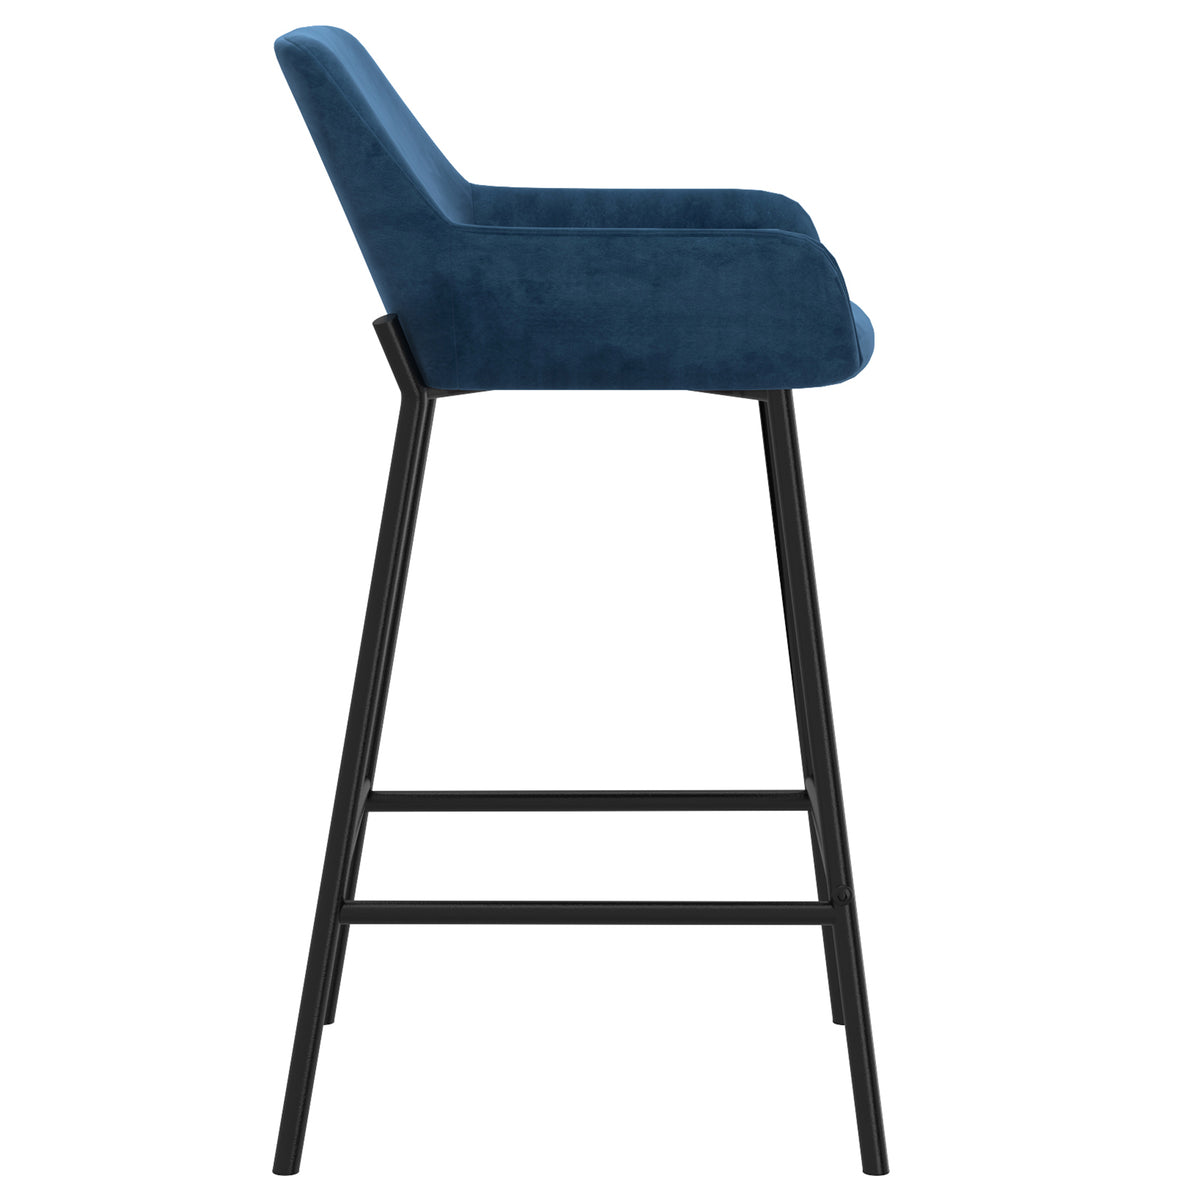 Baily 26'' Counter Stool Blue